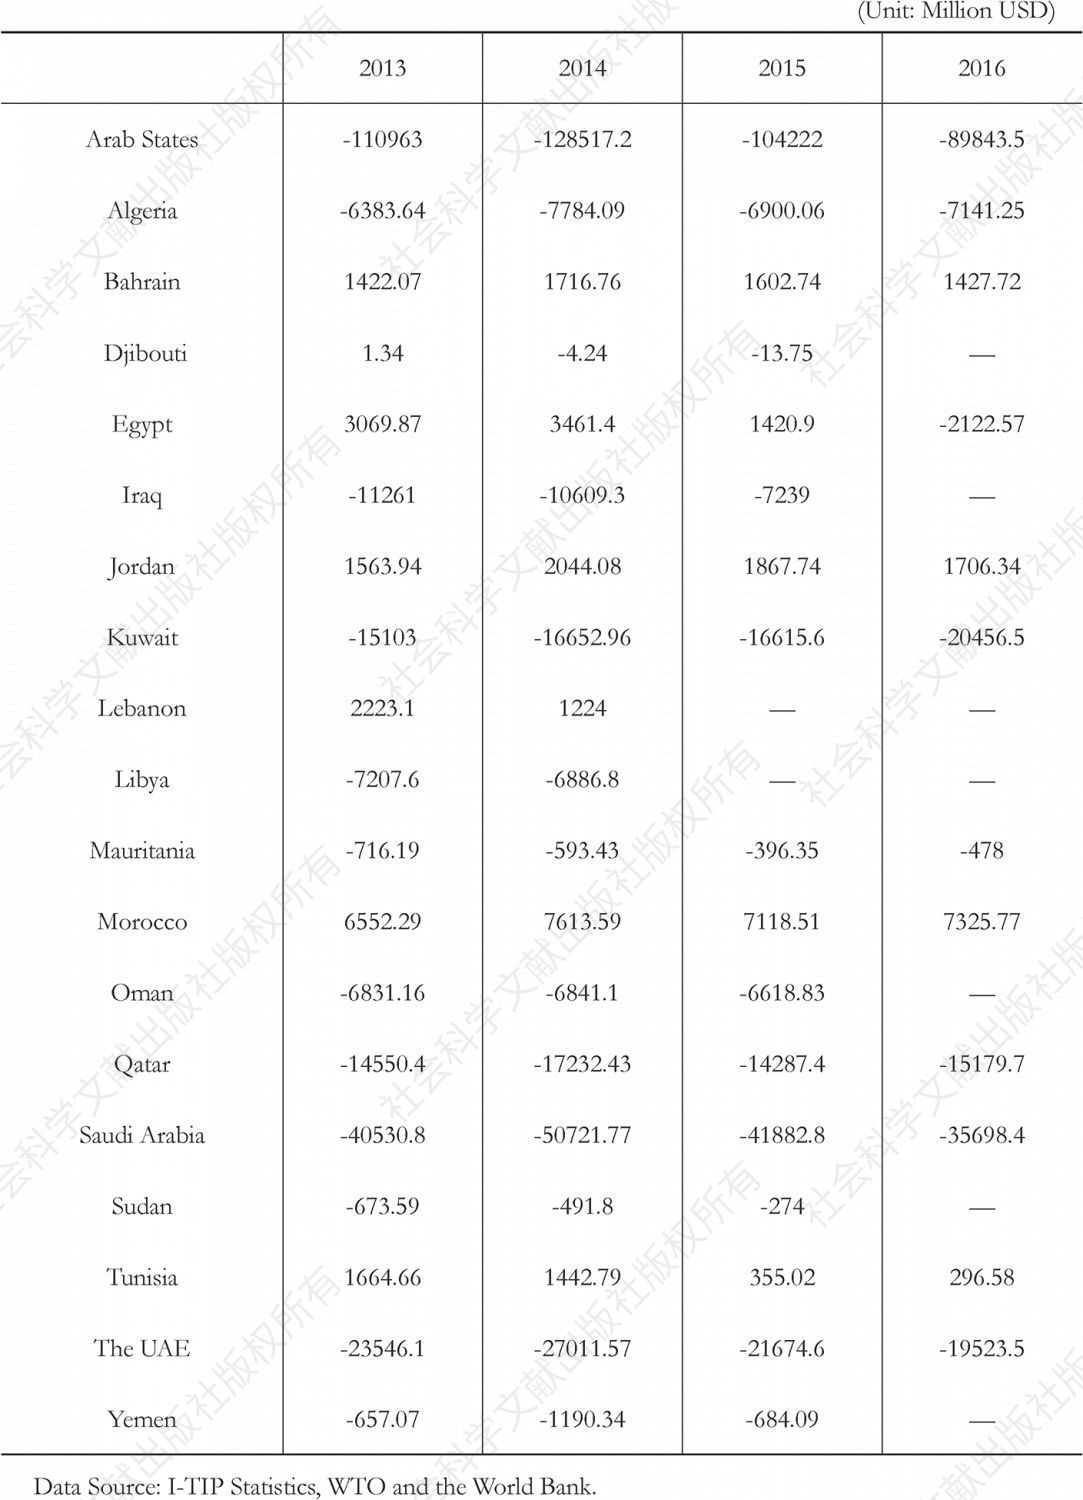 Table 5.3 Balance of Trade in Services of Arab States